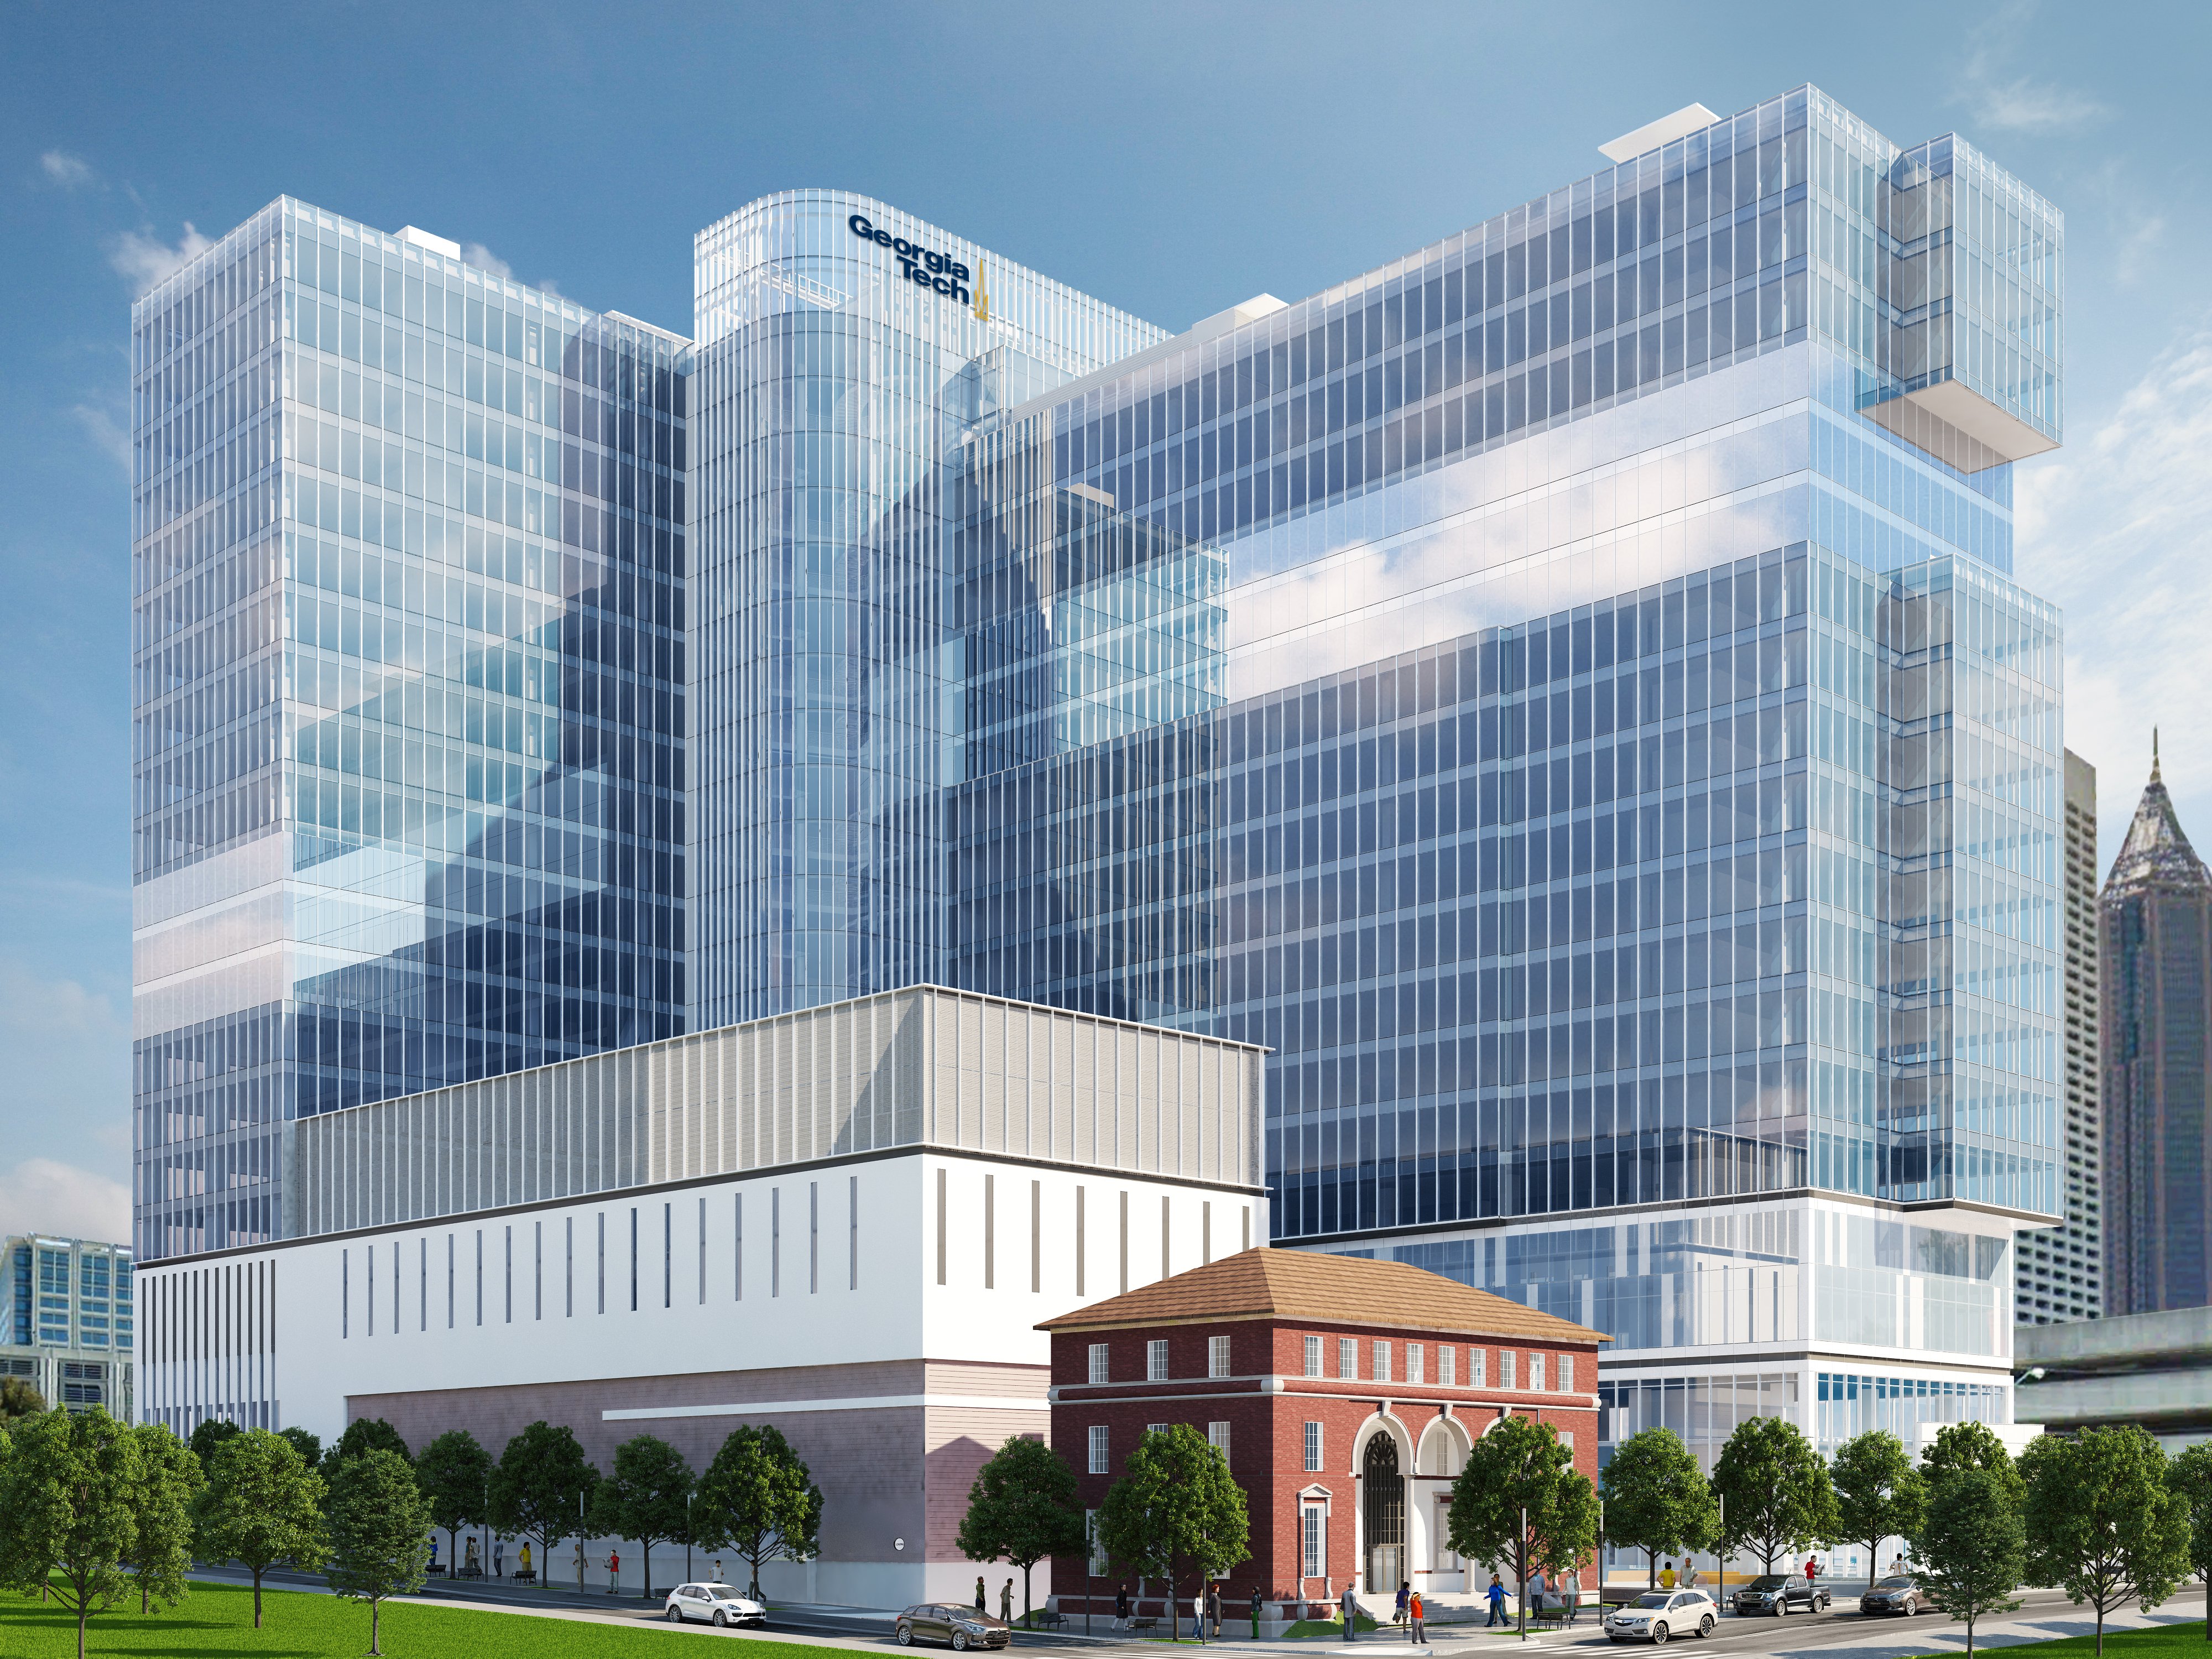 A rendering of the Coda Building, due to be completed in 2019.